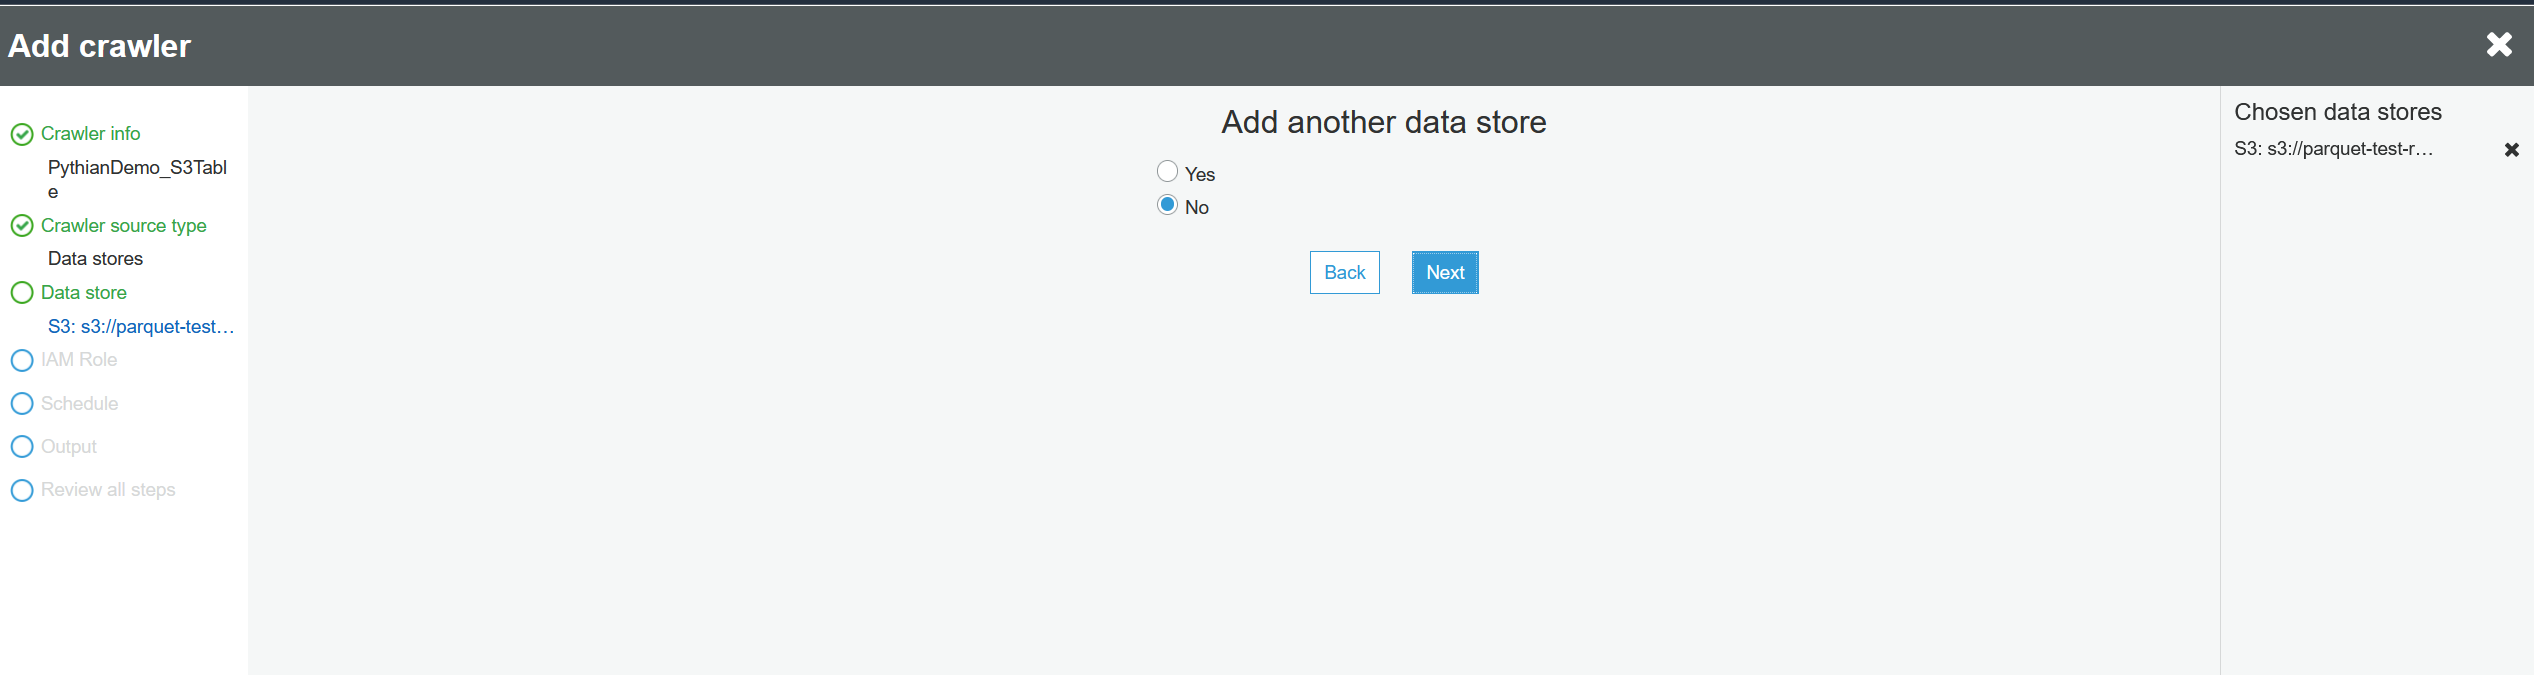 Add another data store.